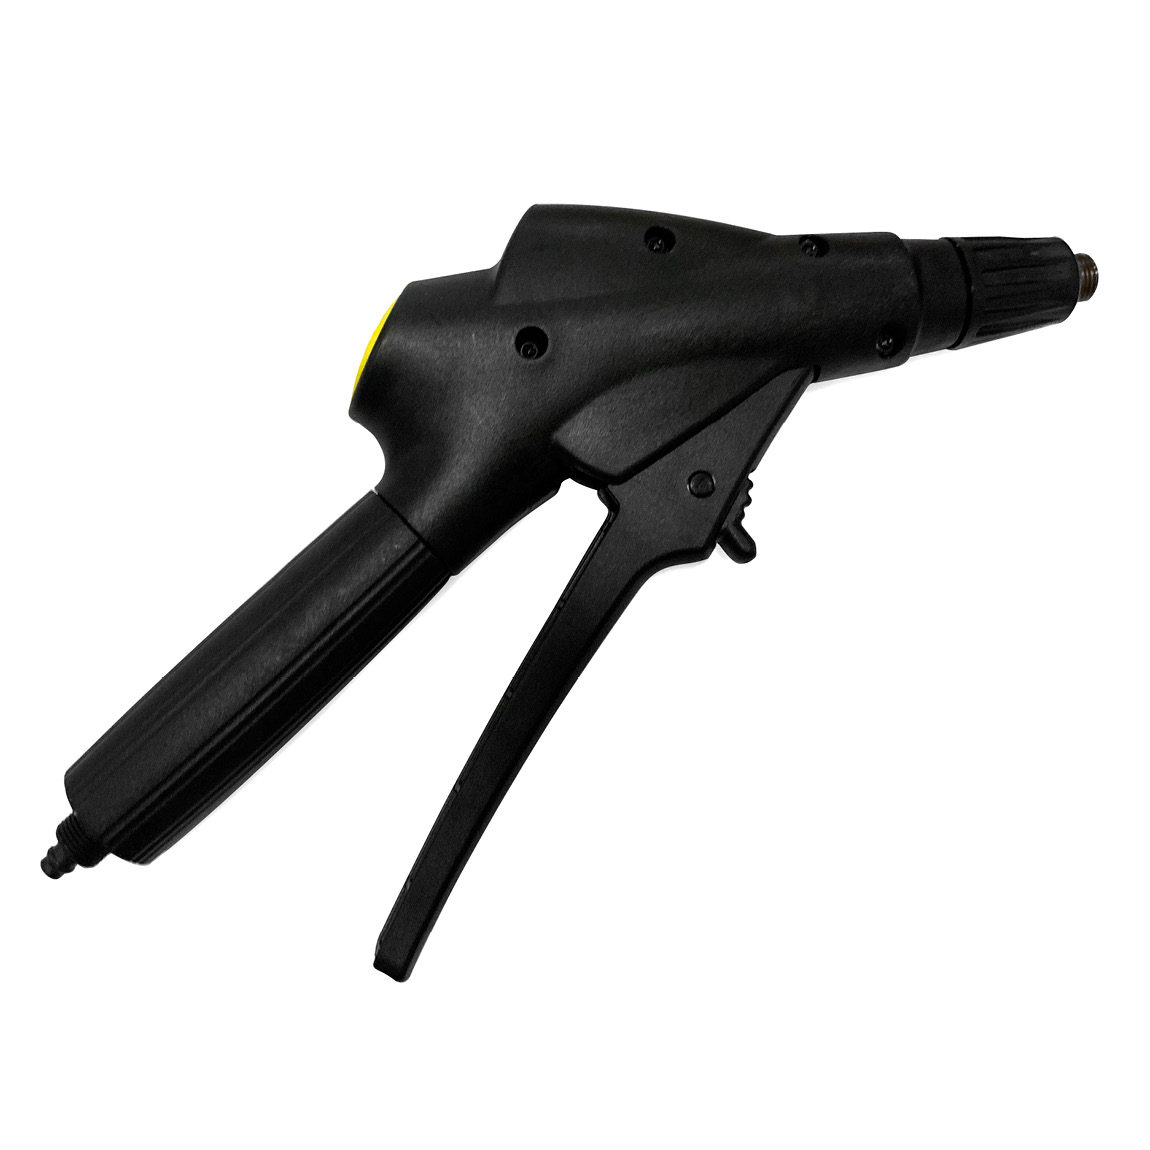 This trigger allows the operator to control the output of Mesto Sprayers. These triggers can be ordered from Speedcrete, United Kingdom as a replacement part to extent the longevity of the product. This trigger can be attached to brass extension wands.